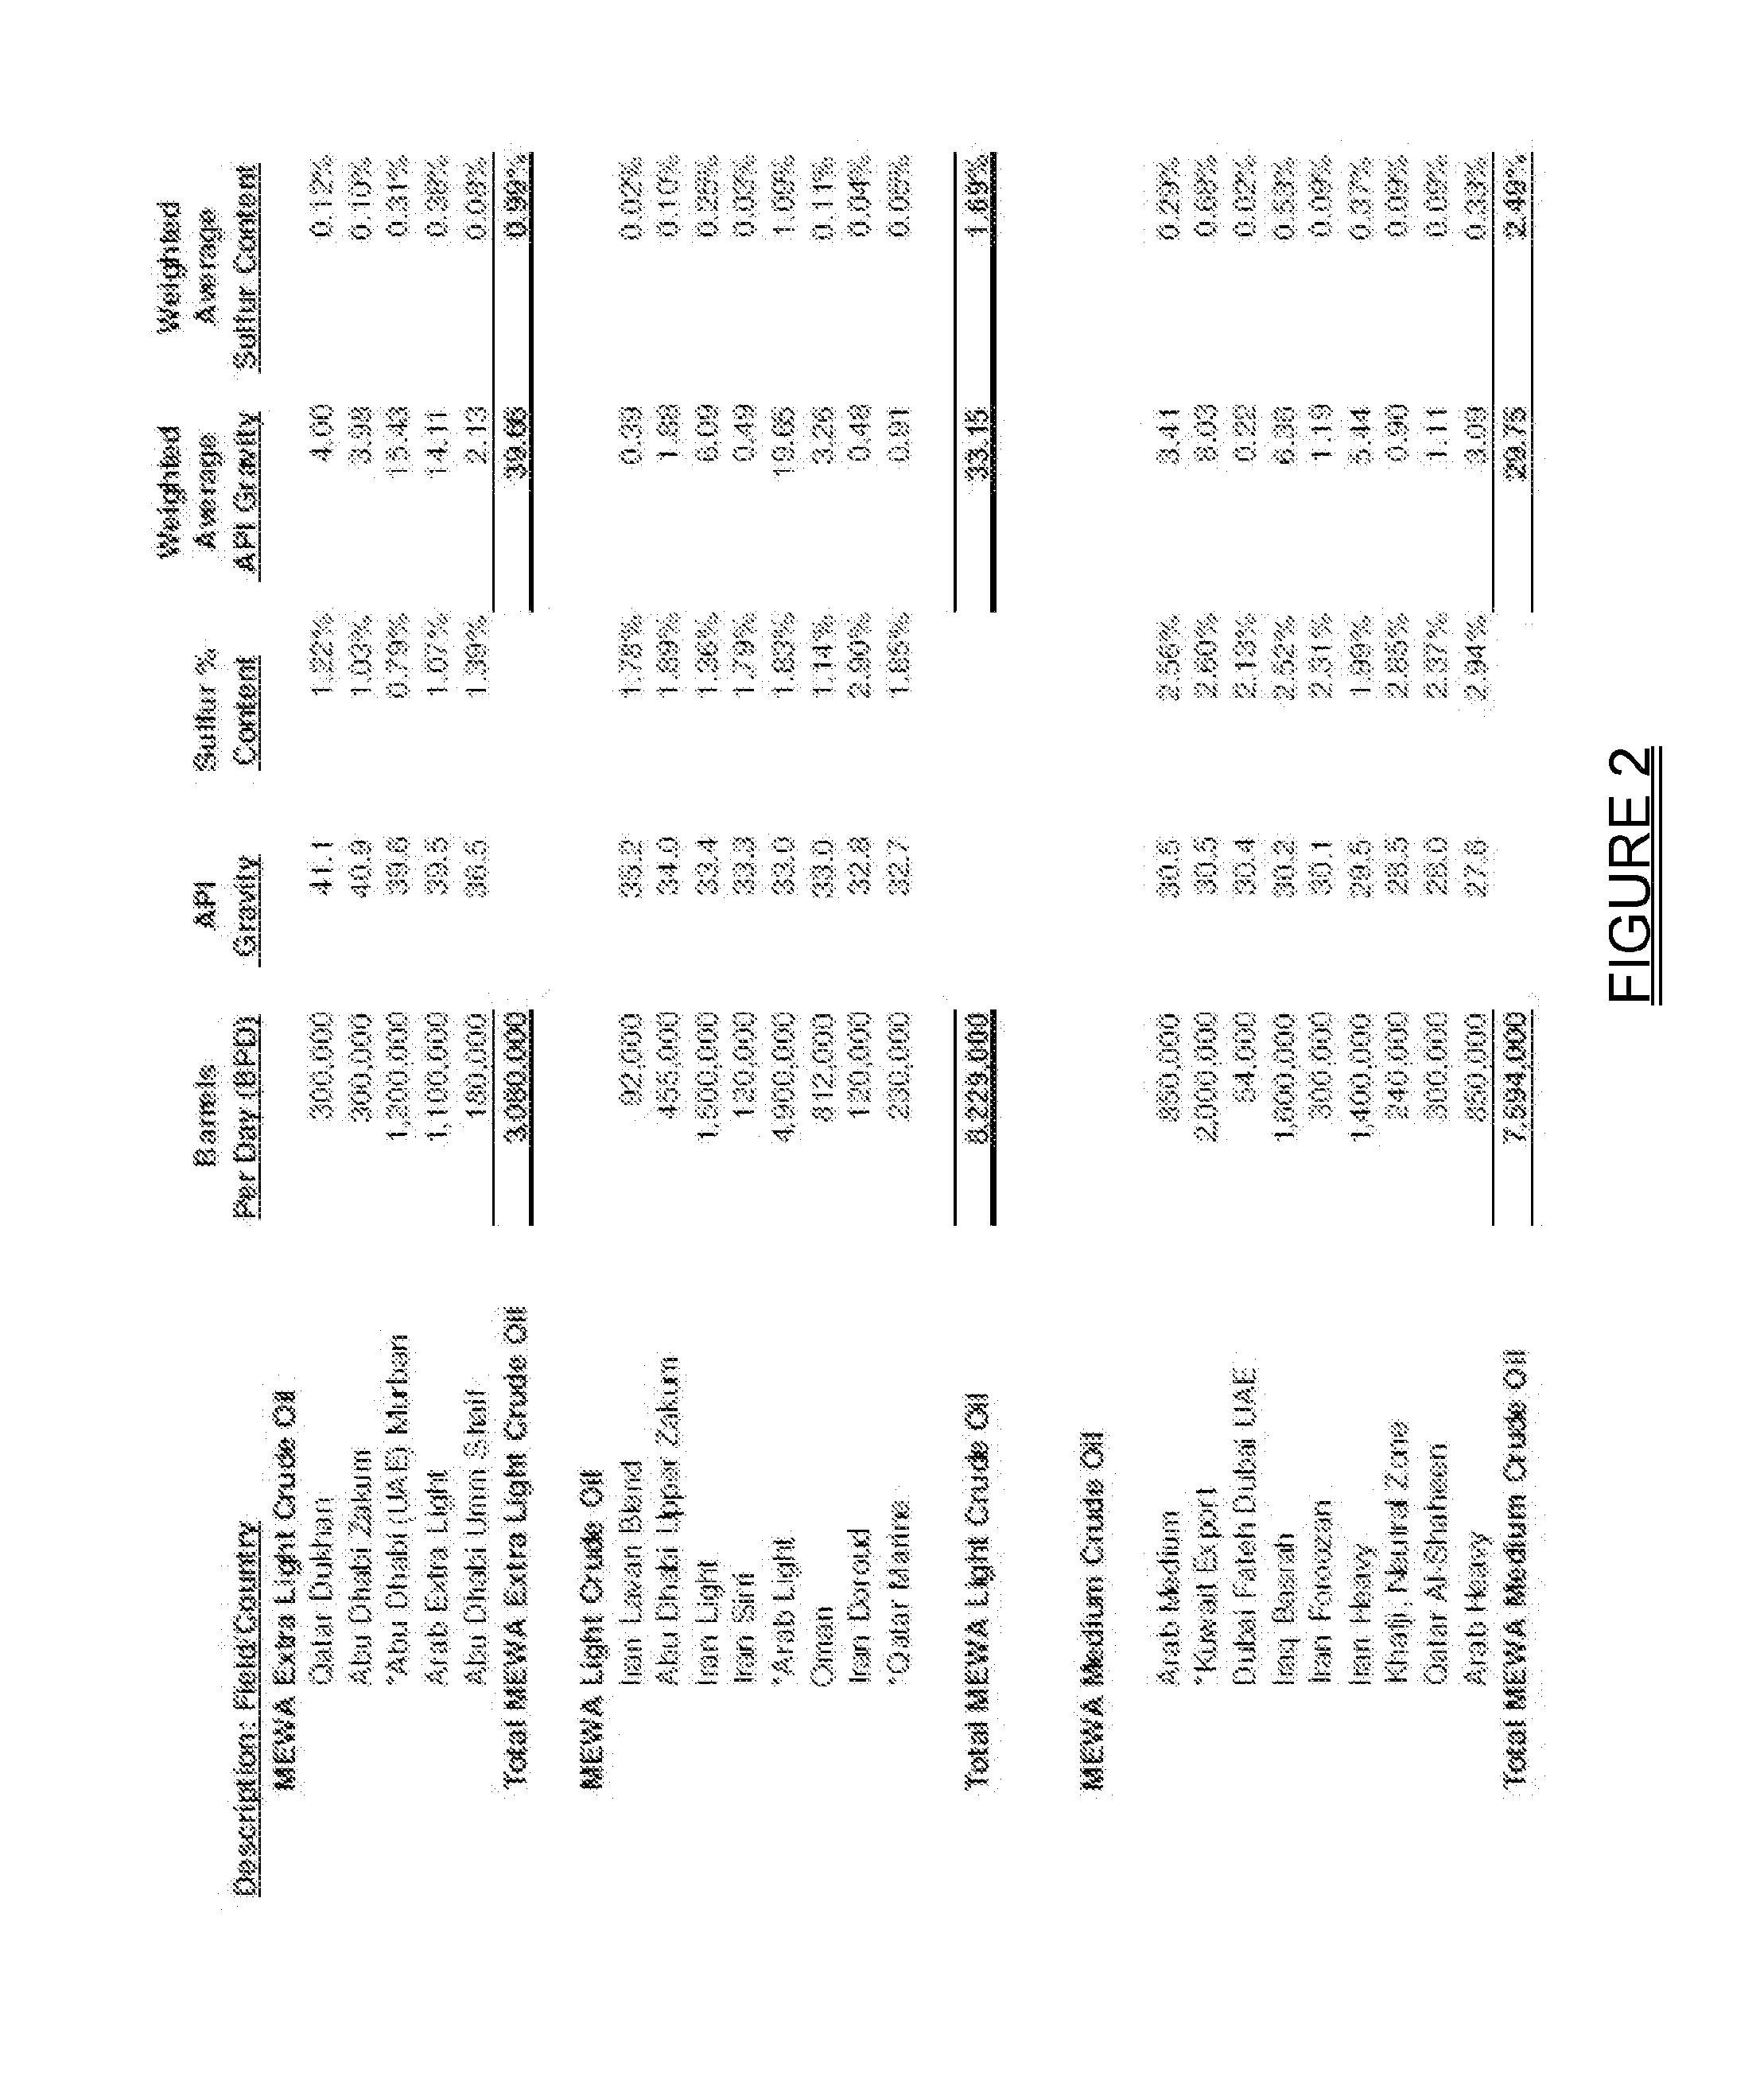 System and Method For Sharia-Based Energy Market Hedging And Related